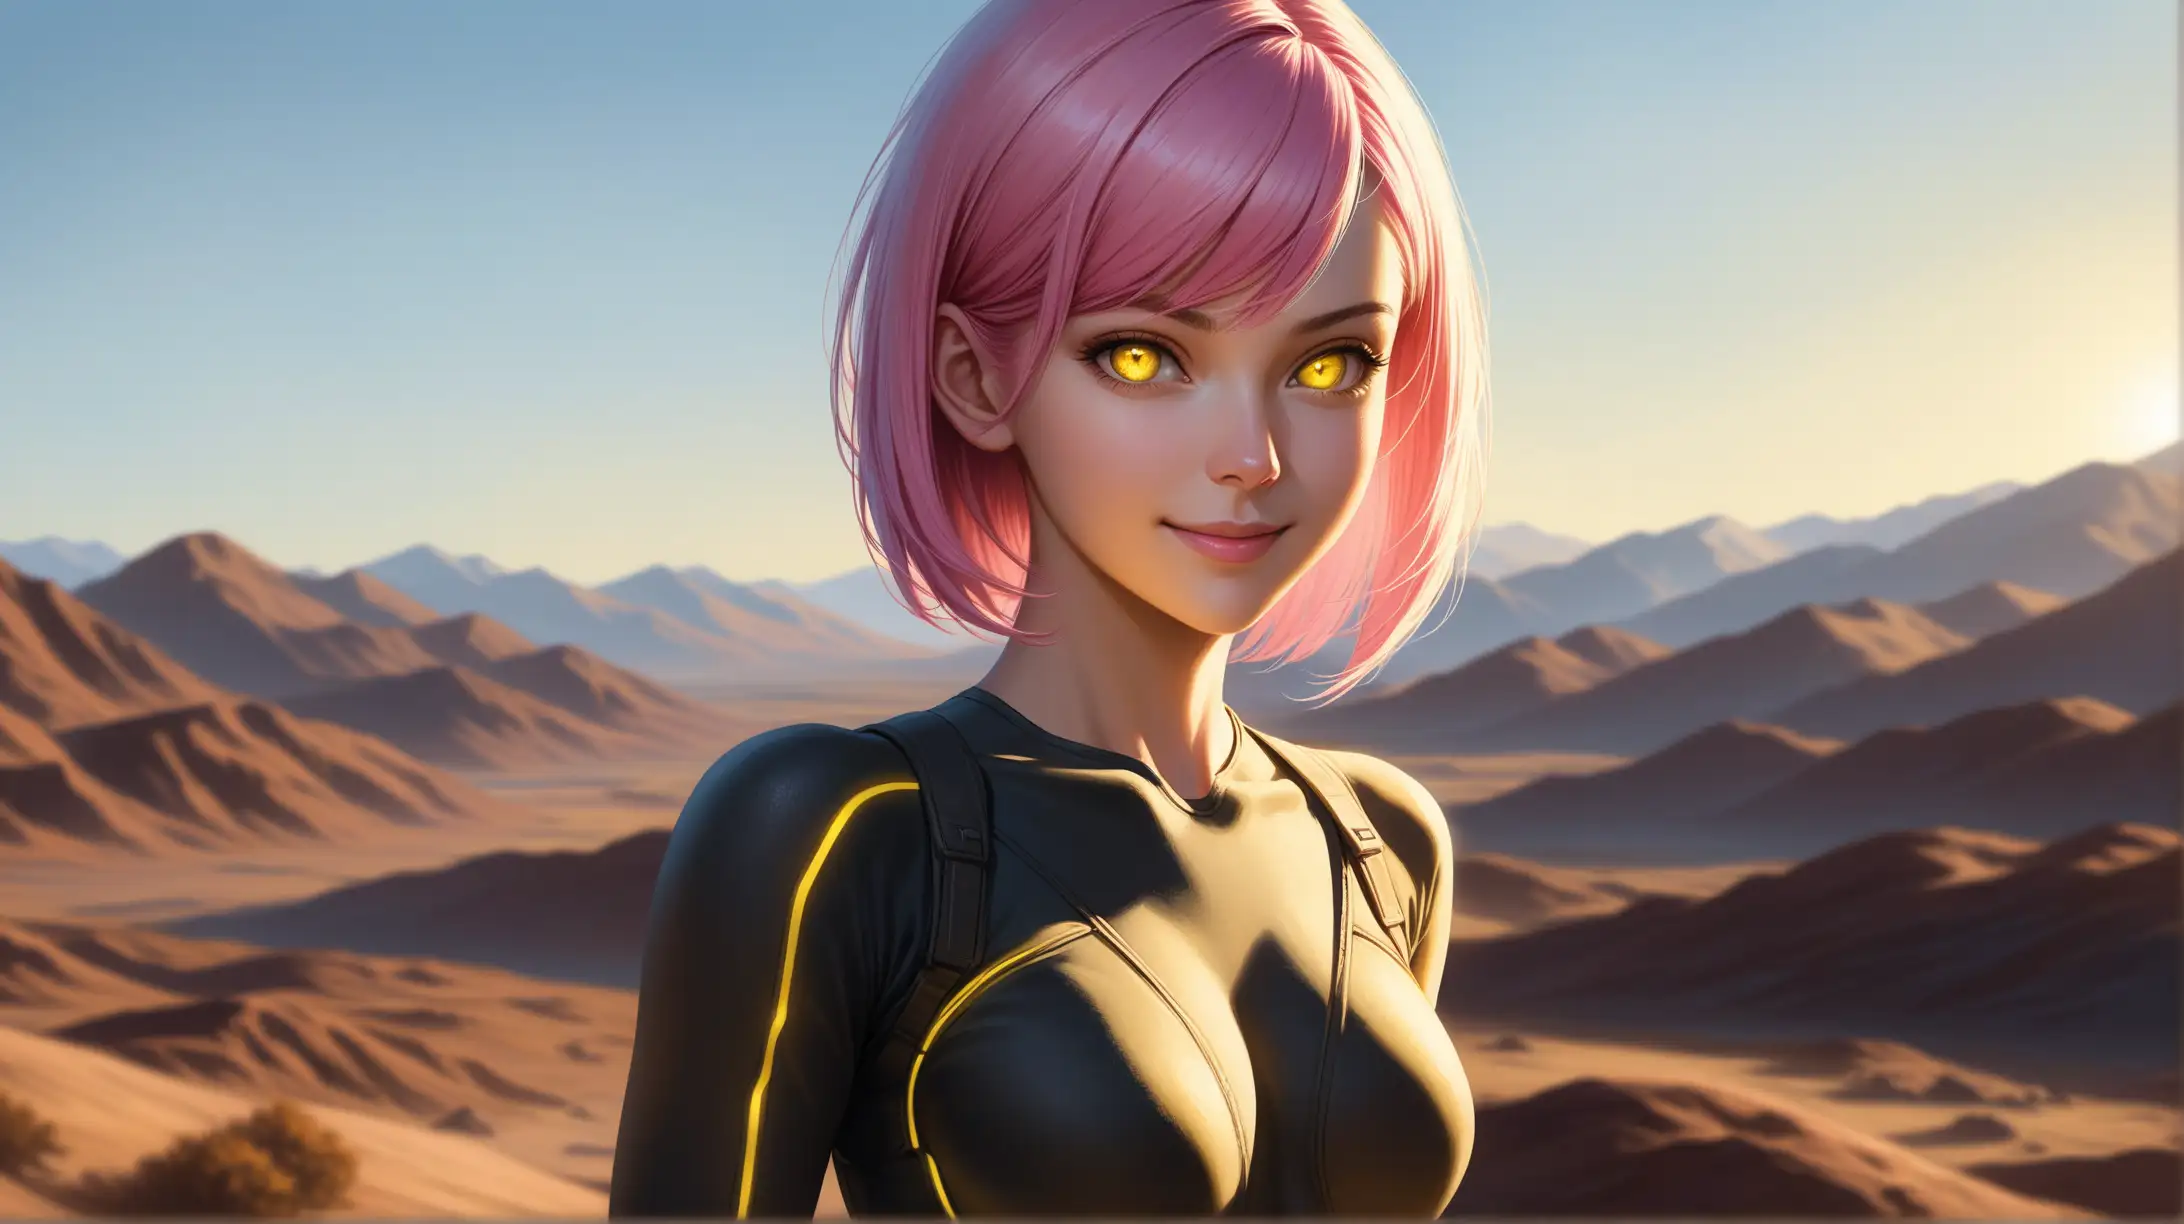 Draw a woman, short pink hair, yellow ringed eyes, slender figure, high quality, realistic, accurate, detailed, long shot, outdoors, ambient lighting, clothing inspired from Fallout, seductive pose, smiling toward viewer